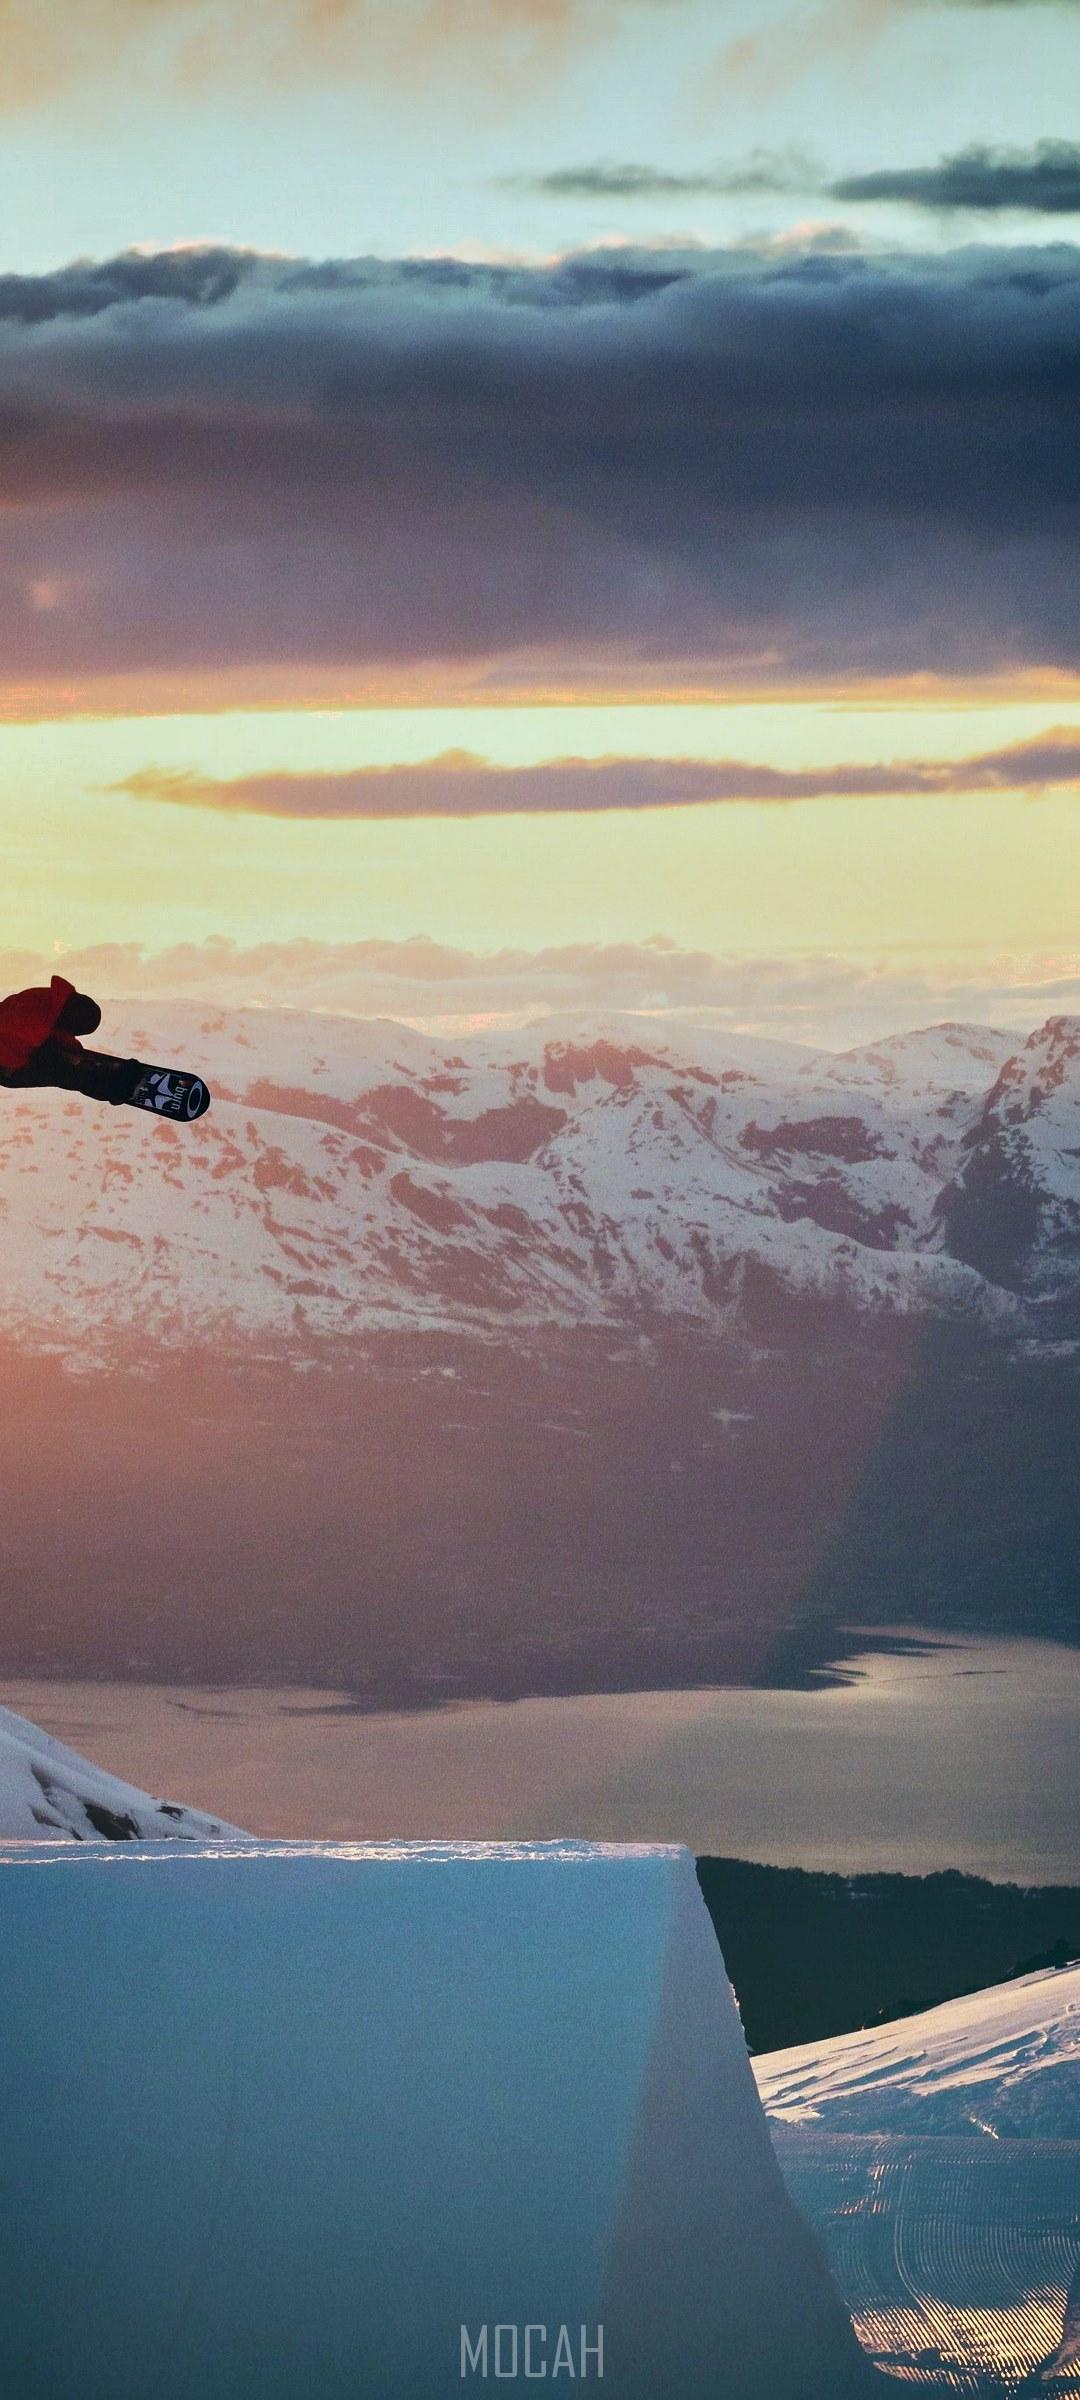 HD wallpaper, Snowboarder In Flight, A Snowboarder Is Airborne Surrounded By Golden Skies And Snowy Mountains, Lg K62 Hd Download, 1080X2400